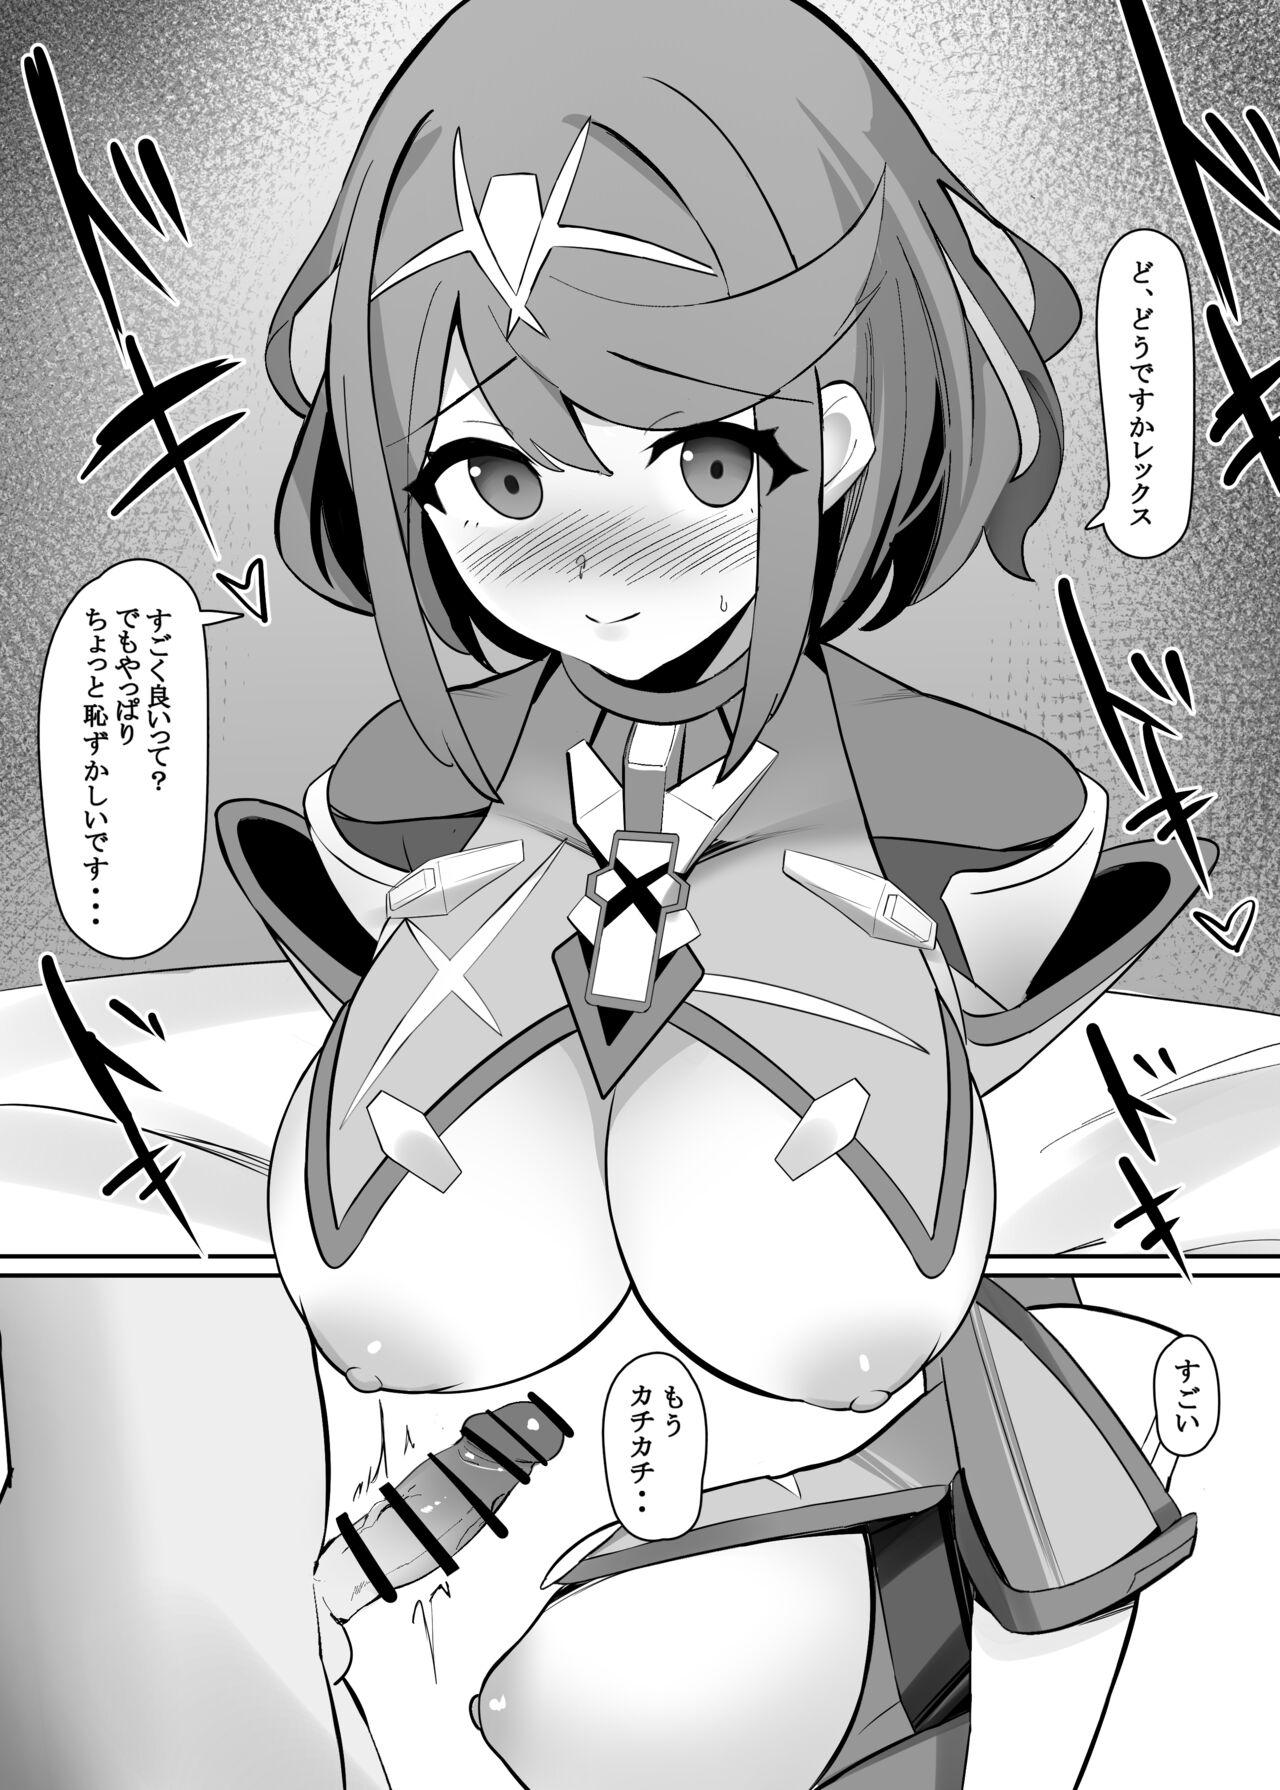 Blowjob Porn Homura Manga - Xenoblade chronicles 2 First - Picture 2